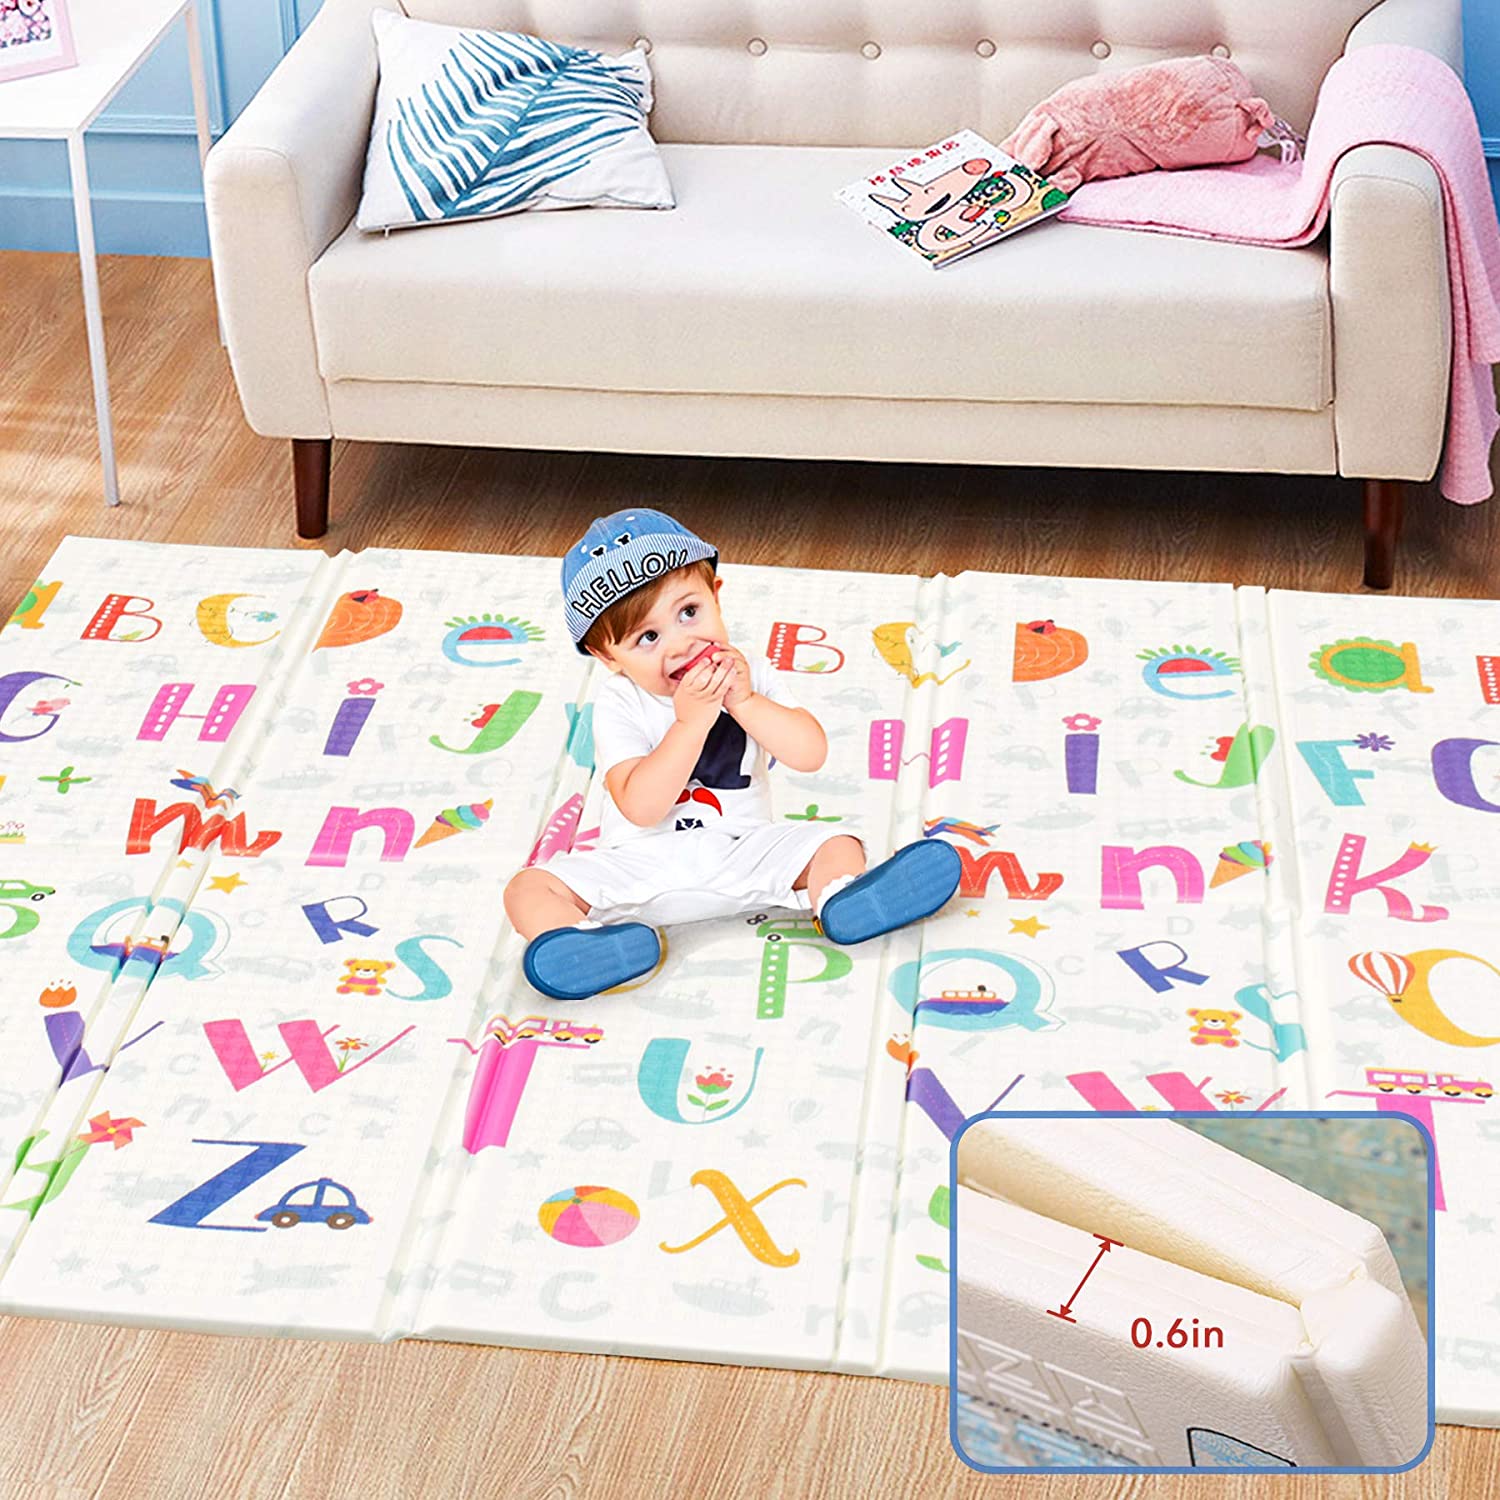 Factory Outlets Kids Corner Tent - Foldable Baby Play Mat 0.6 Inch Thick Waterproof Baby Crawling Mat 79” x 71” Extra Large Play Mats for Babies Reversible Multifunctional Mats (Letter) – Ea...